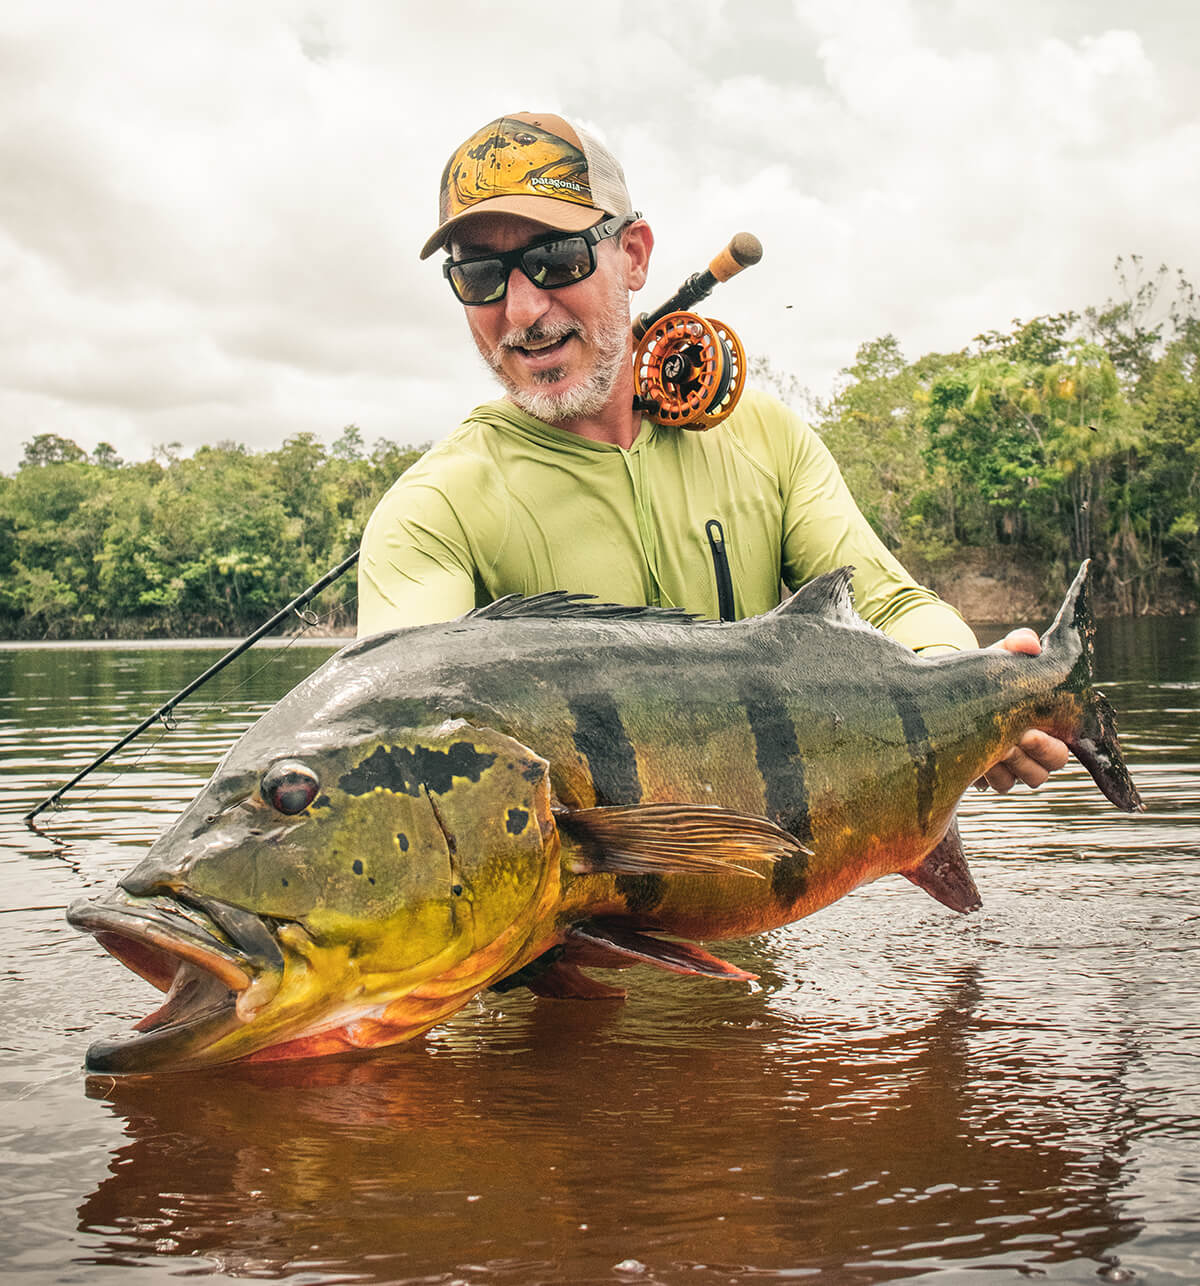 IGFA Peacock Bass All-Tackle Record Landed on Fly Gear - Fly Fisherman